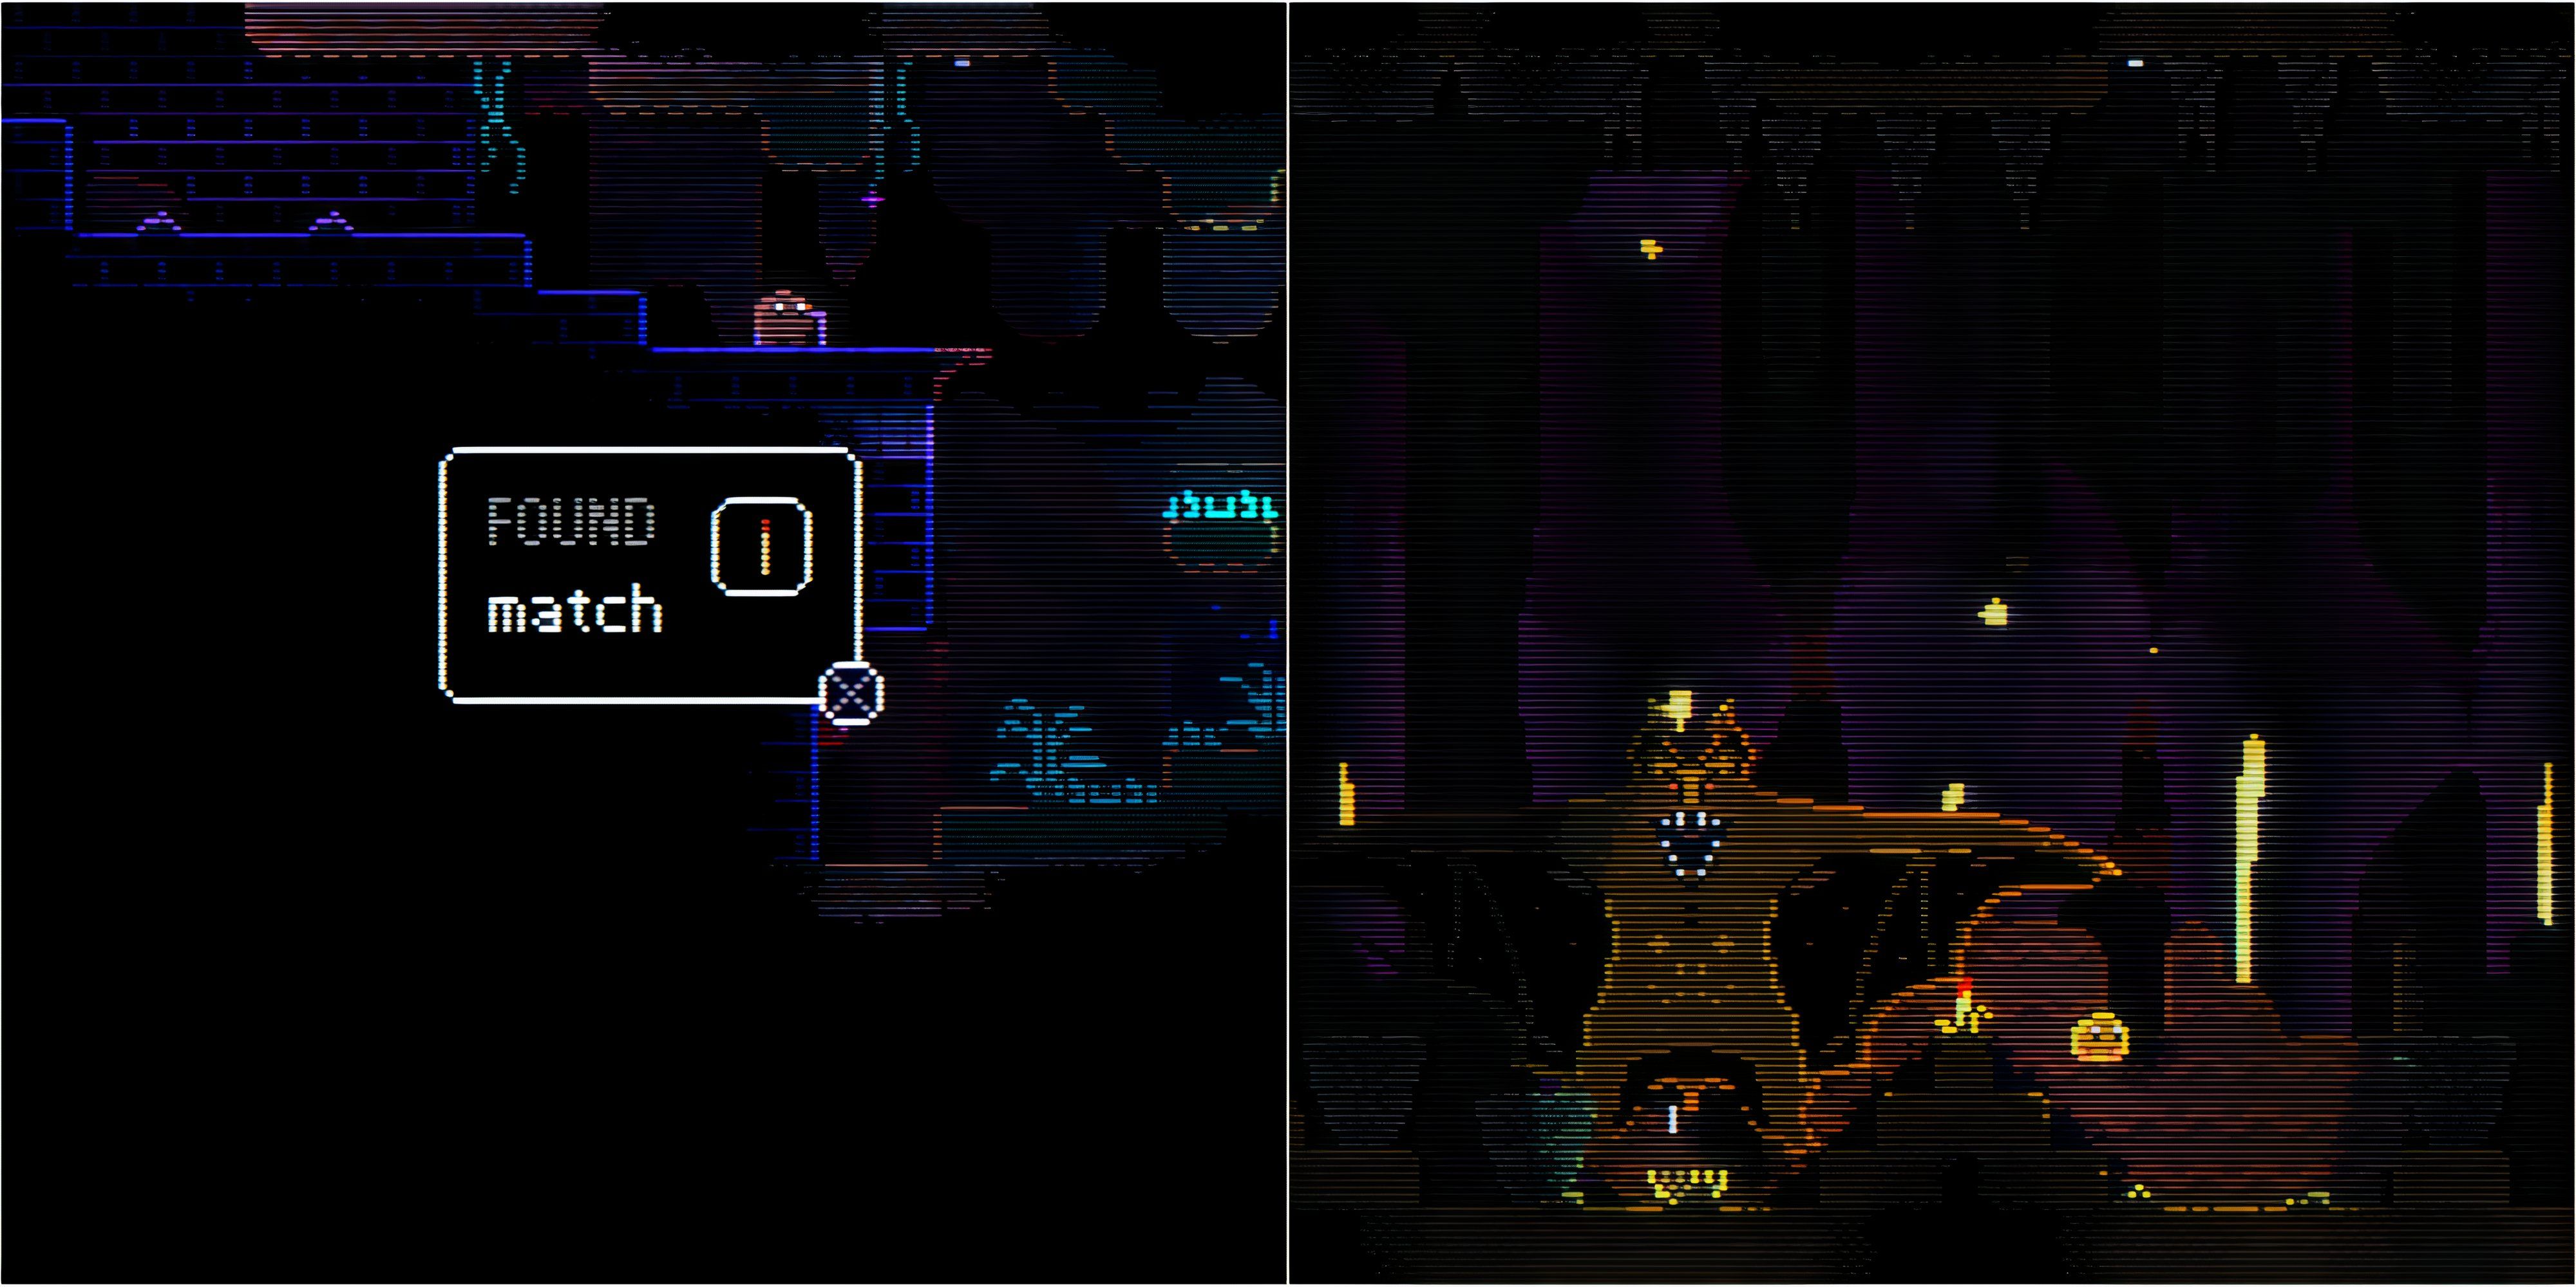 Split image showing a match and the bat boss fight in Animal Well